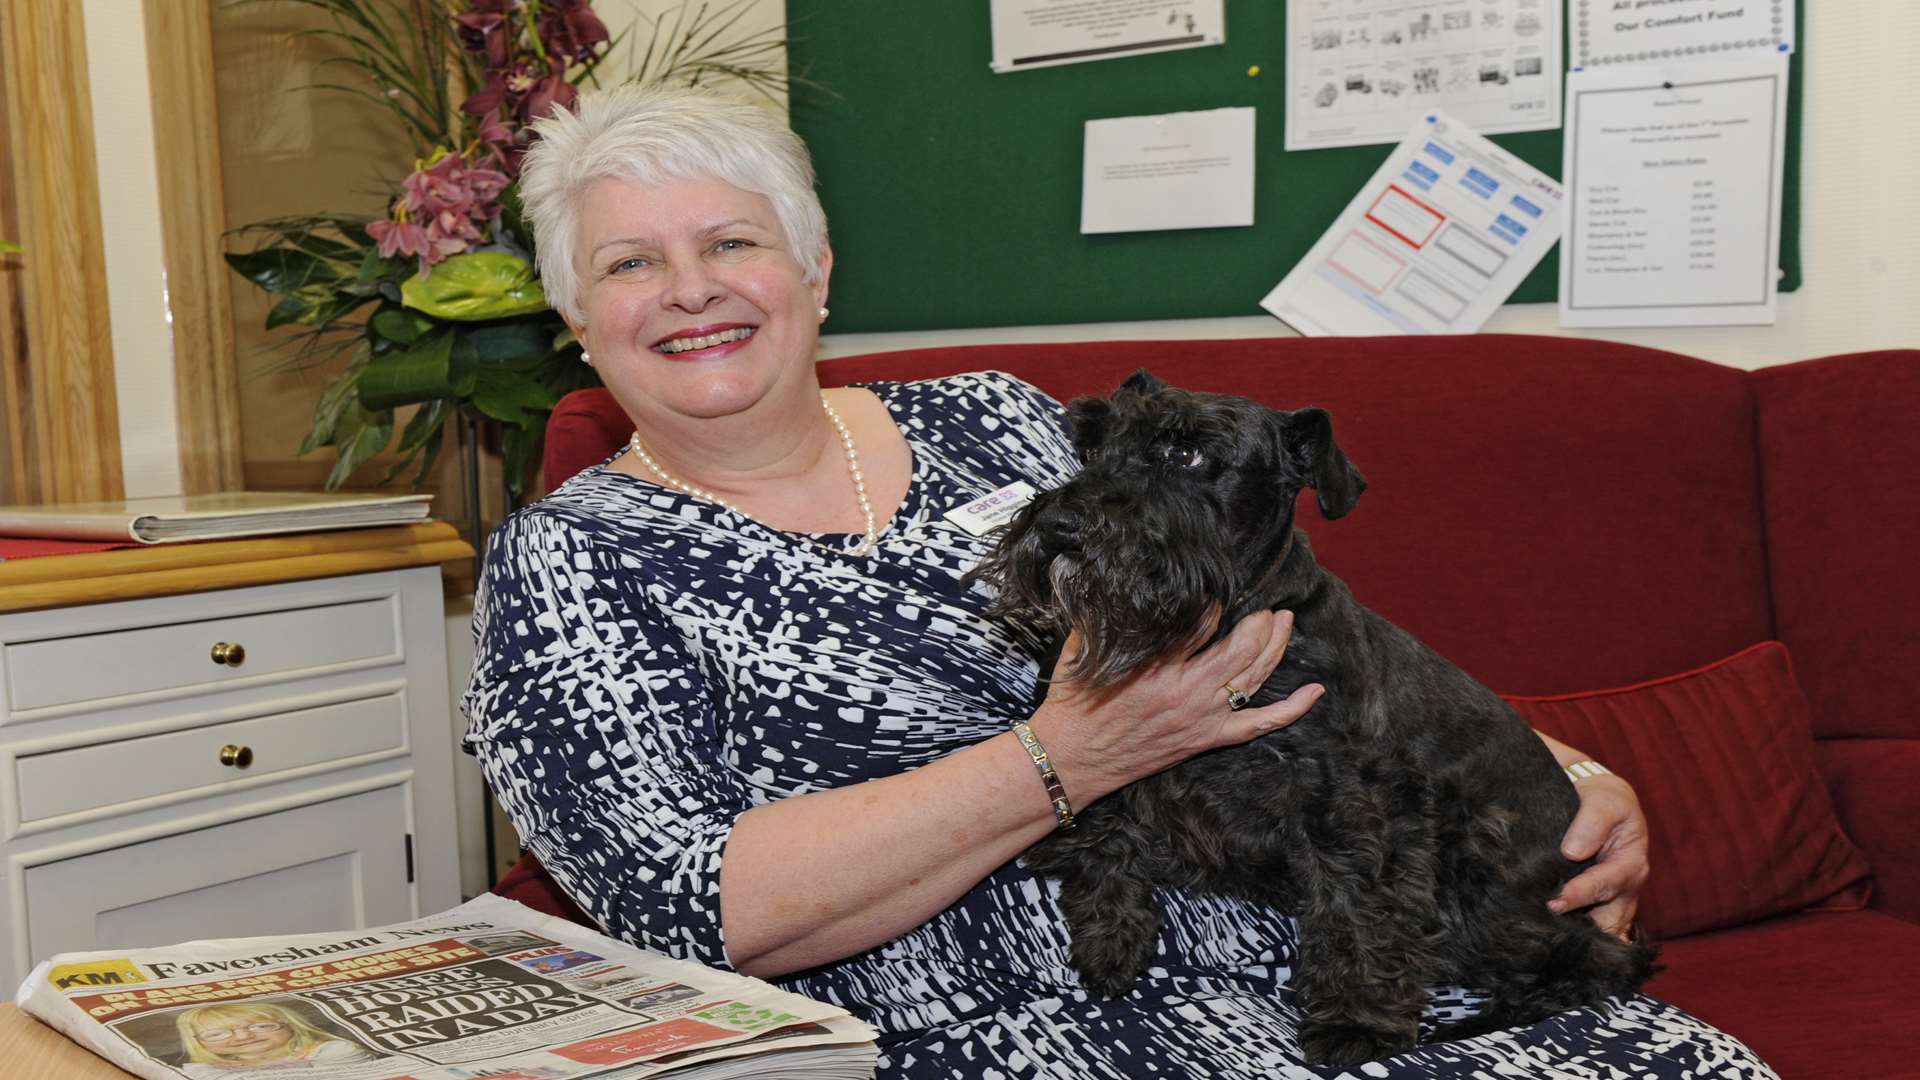 Morse the care home dog with his owner (and boss) Jane Higgins.